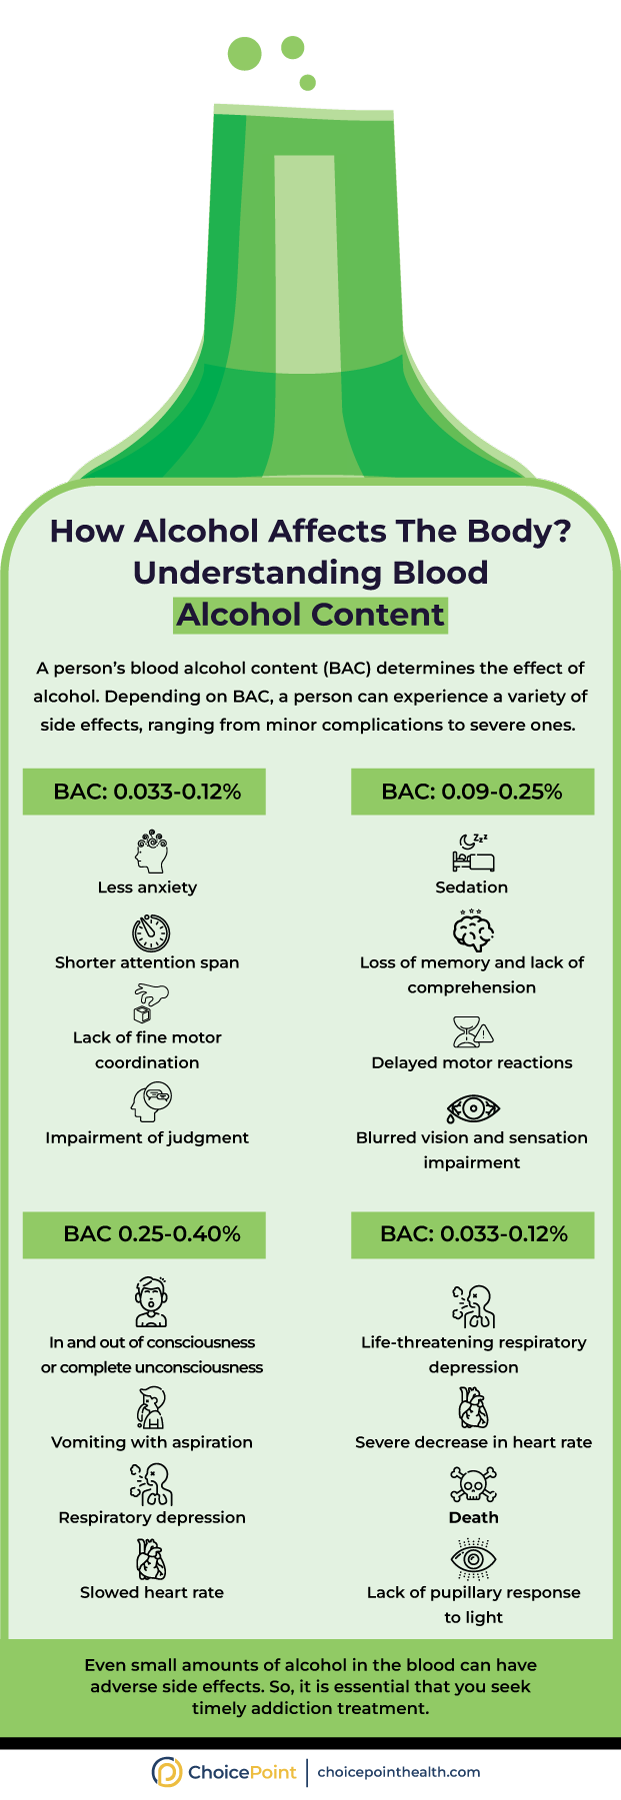 How Alcohol Affects Your Body